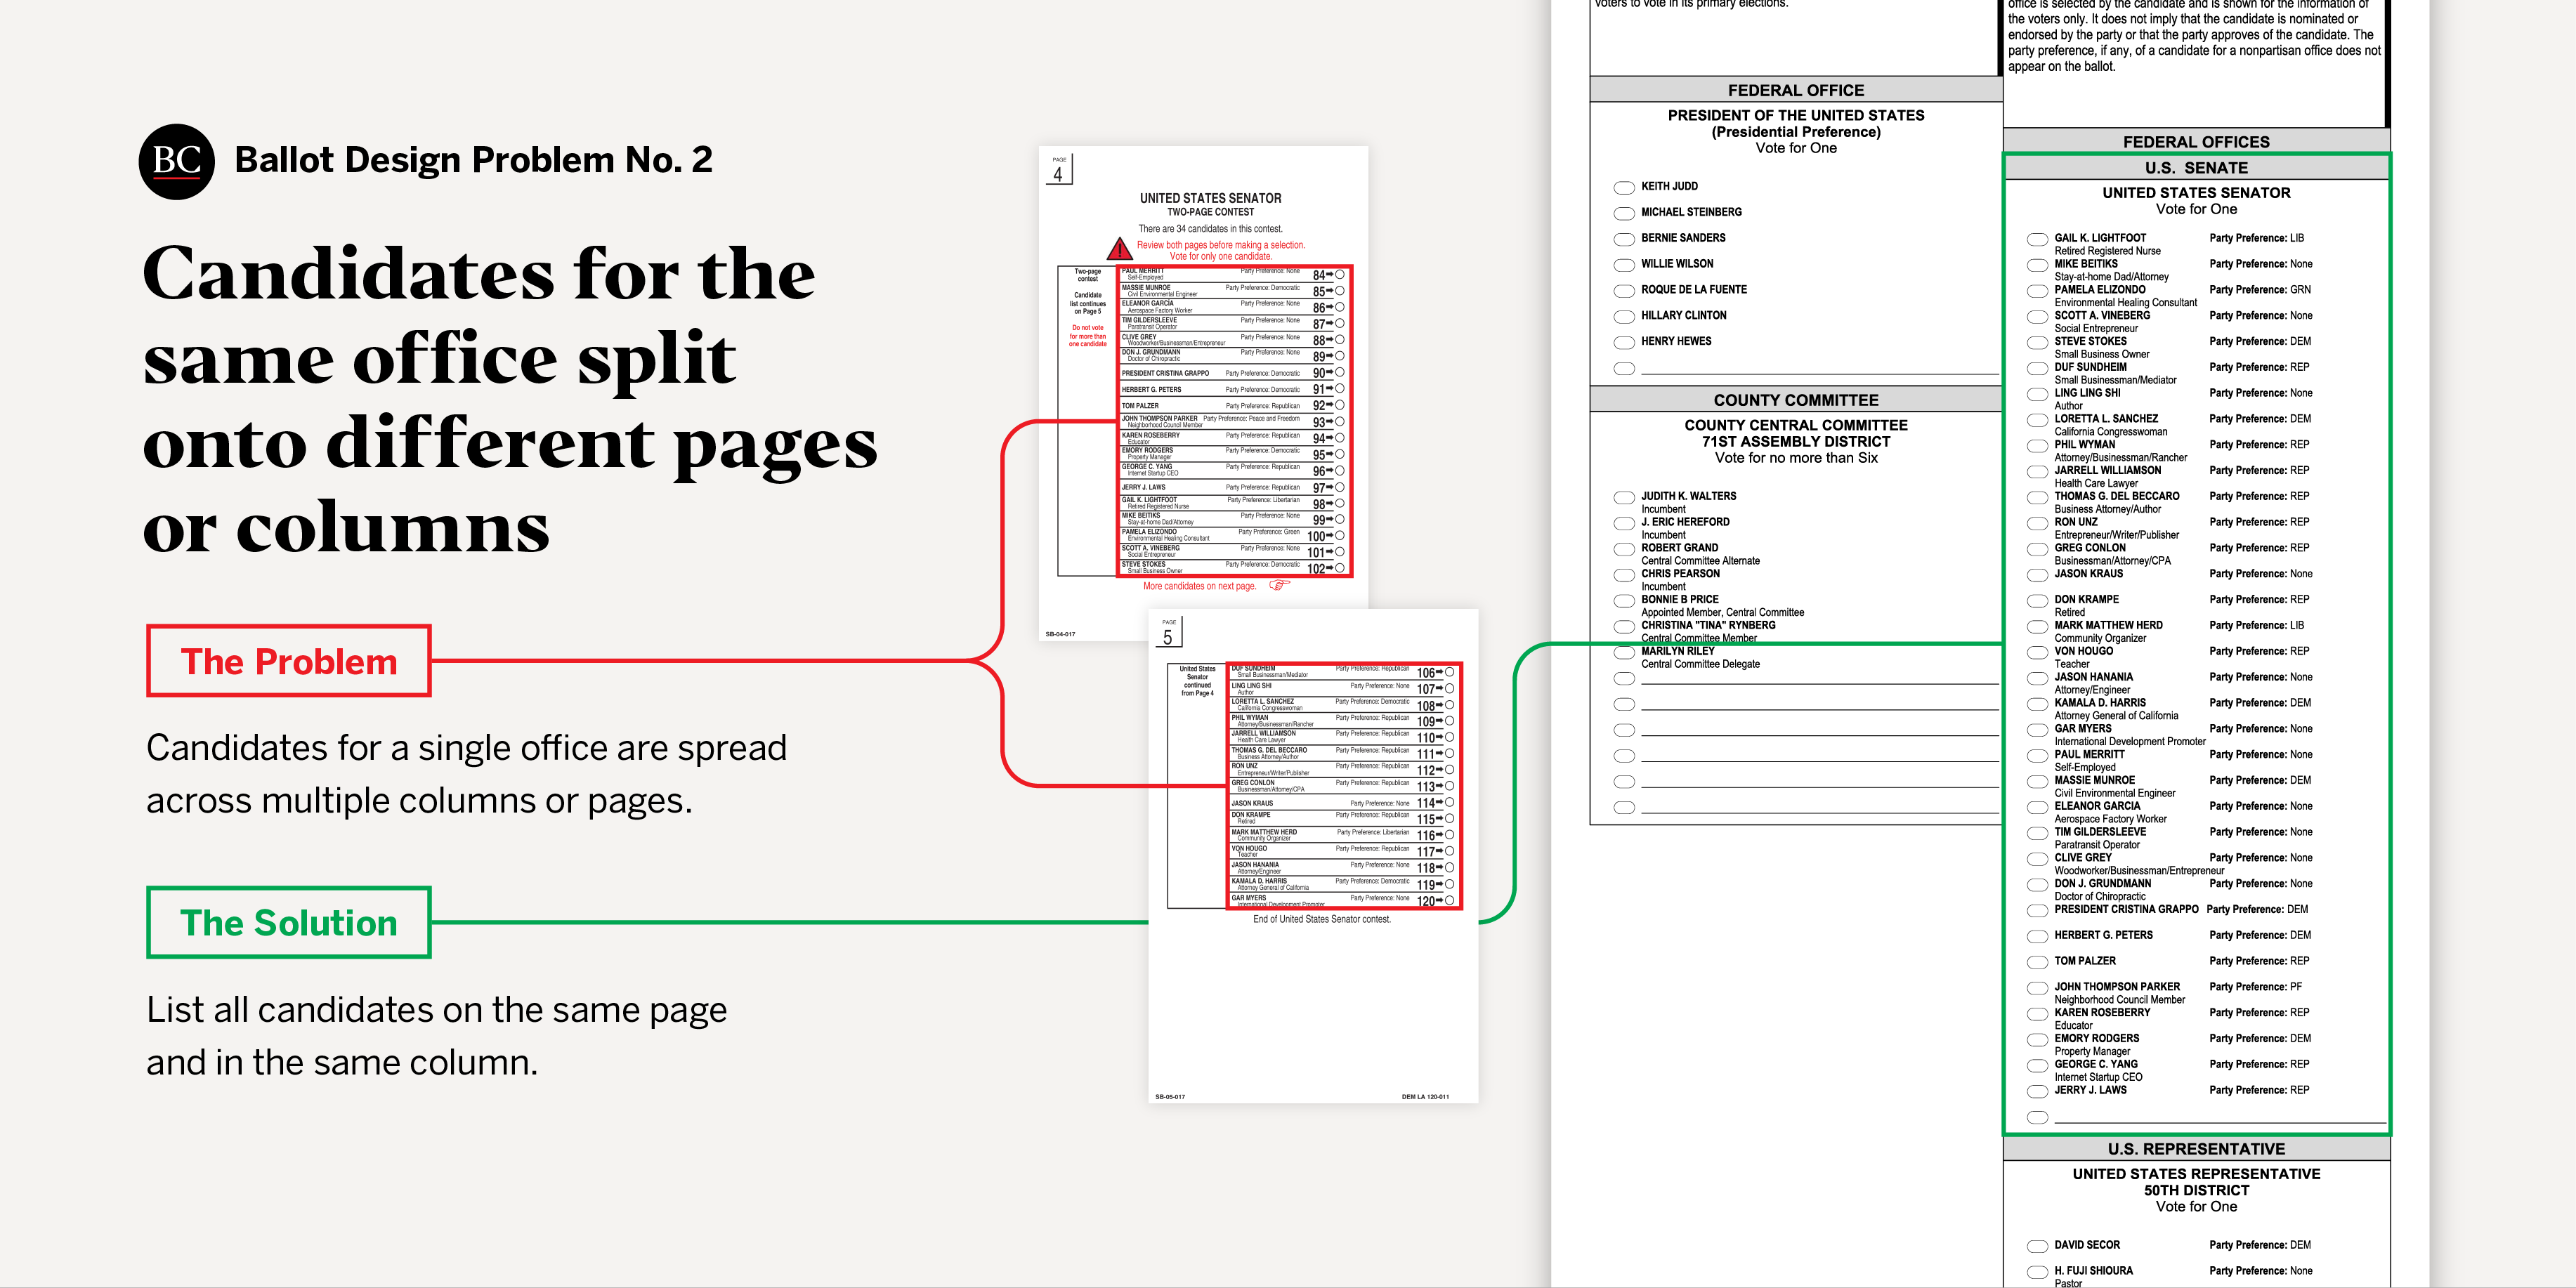 Problem 2 Illustration: Candidates for the same office split onto different pages or columns